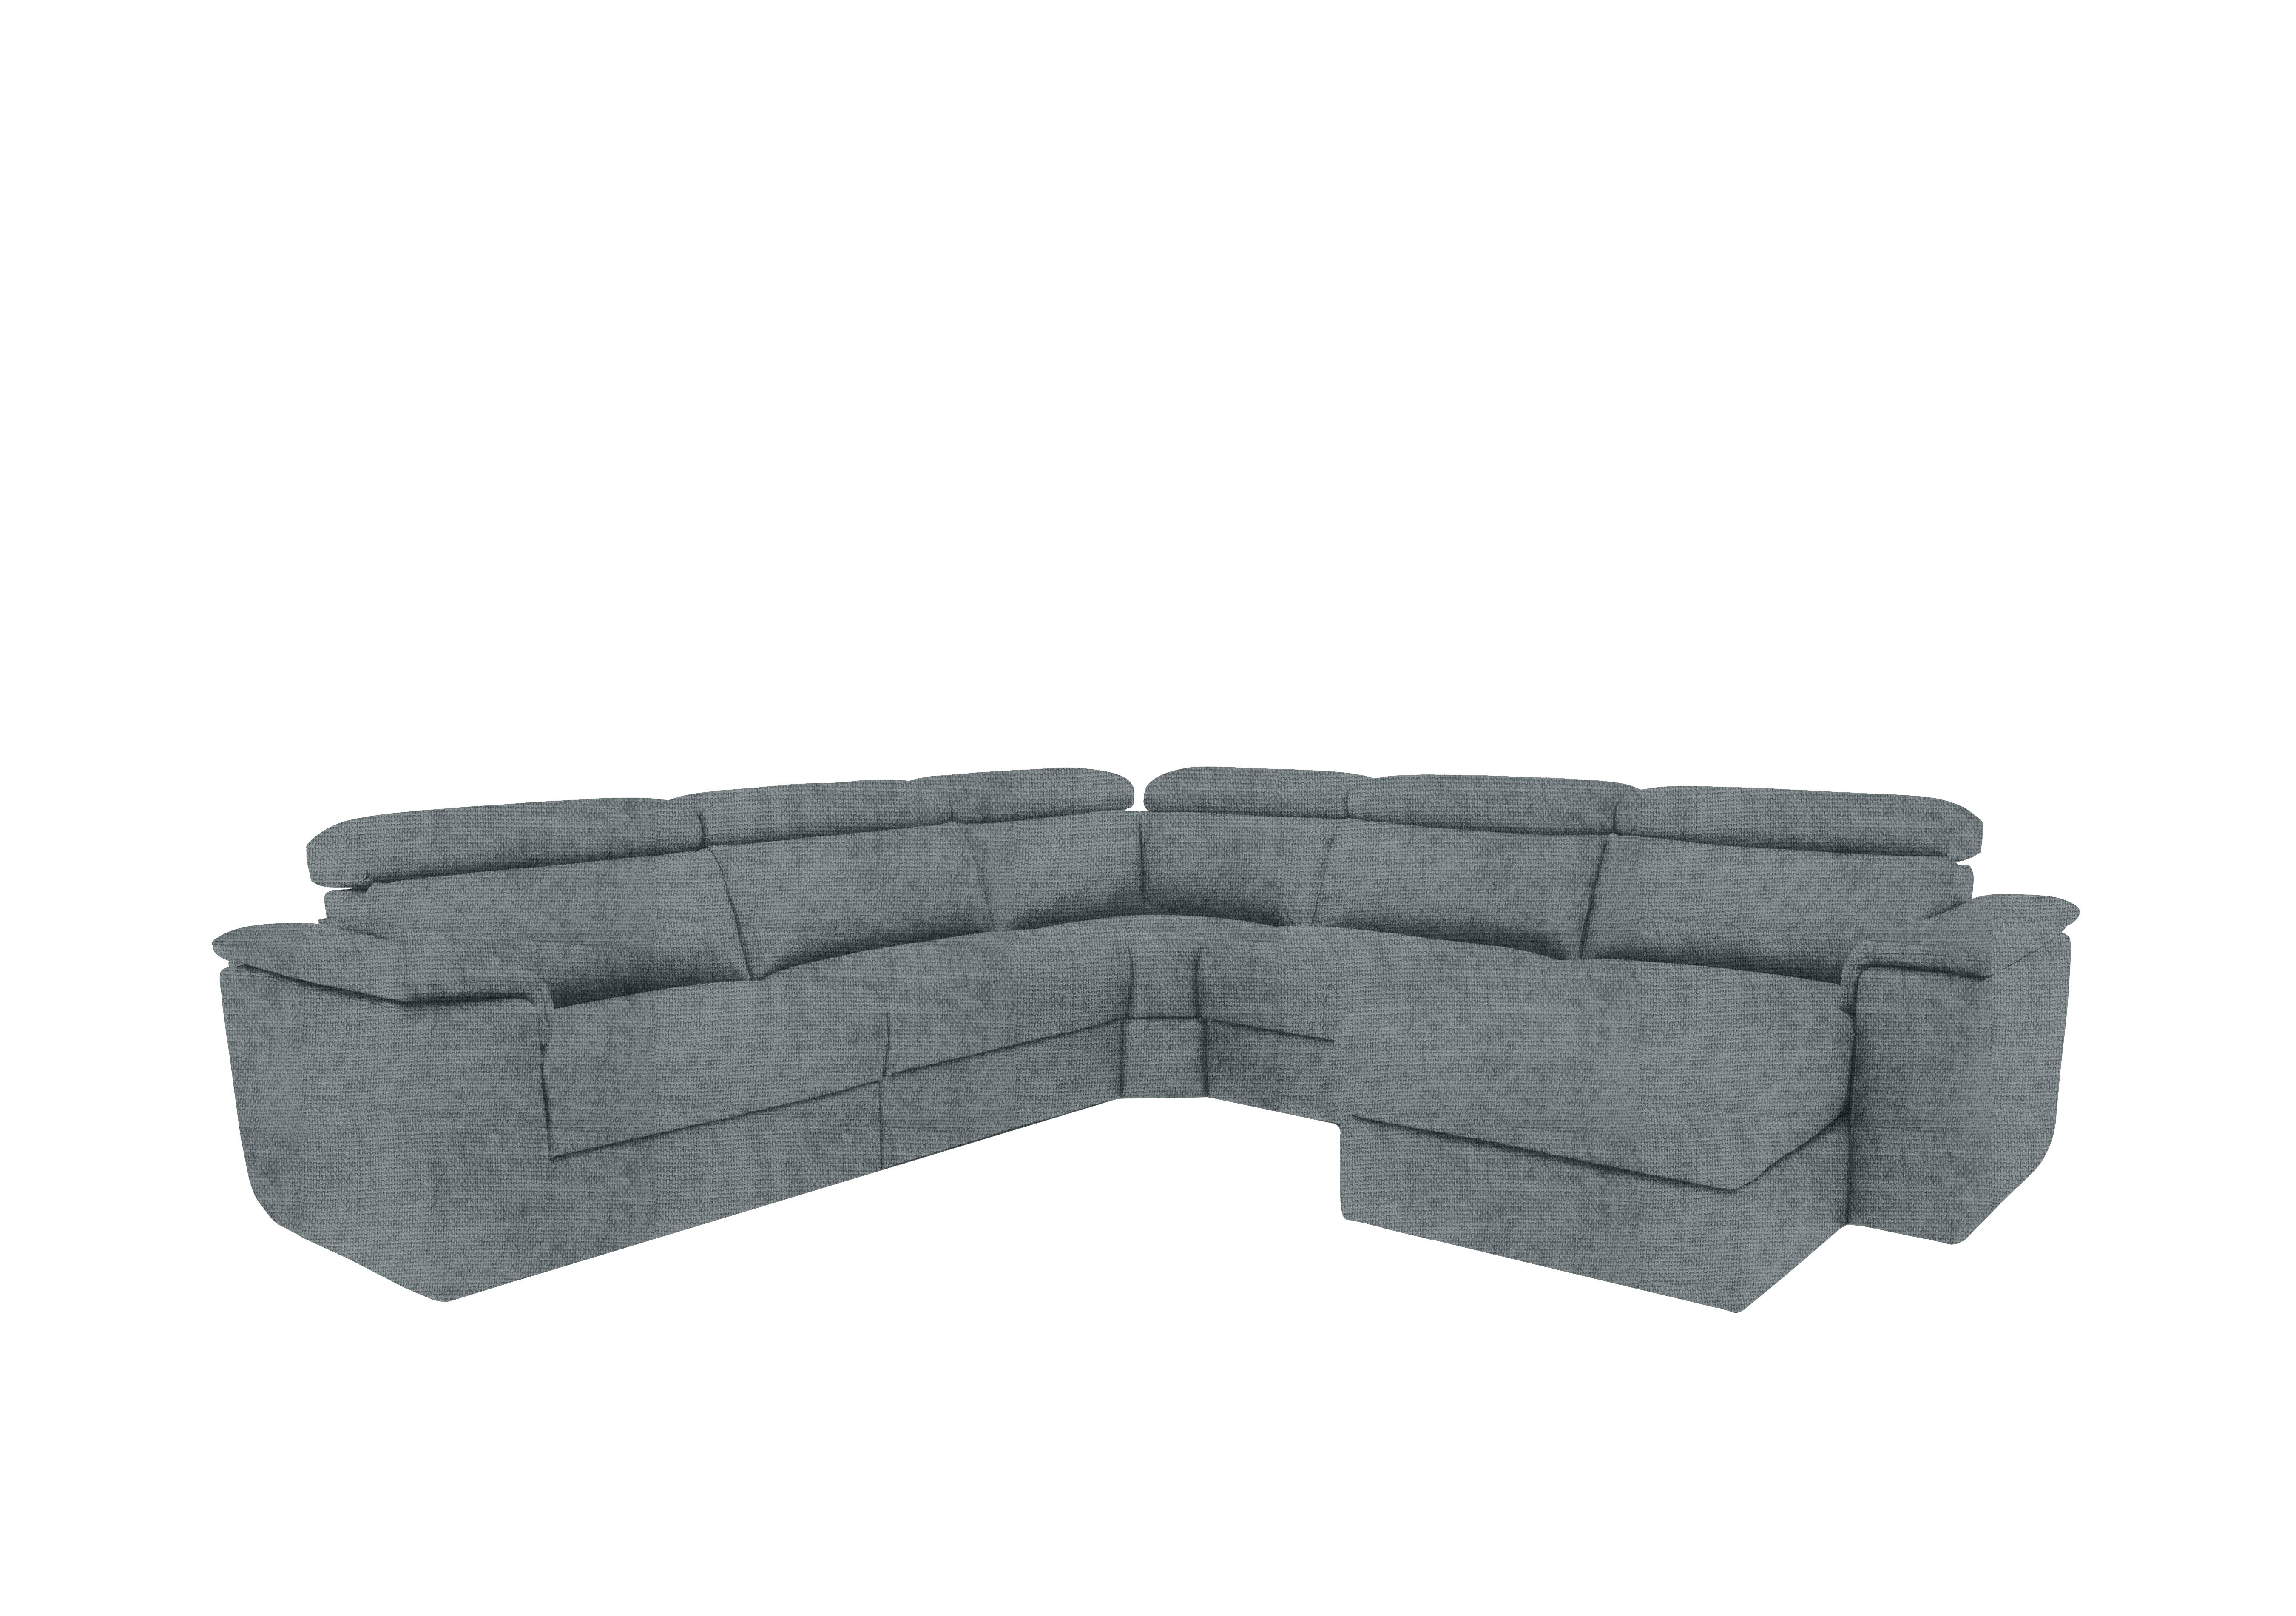 Davide Large Fabric Corner Sofa with Chaise End in Baobab Grigio 546 on Furniture Village